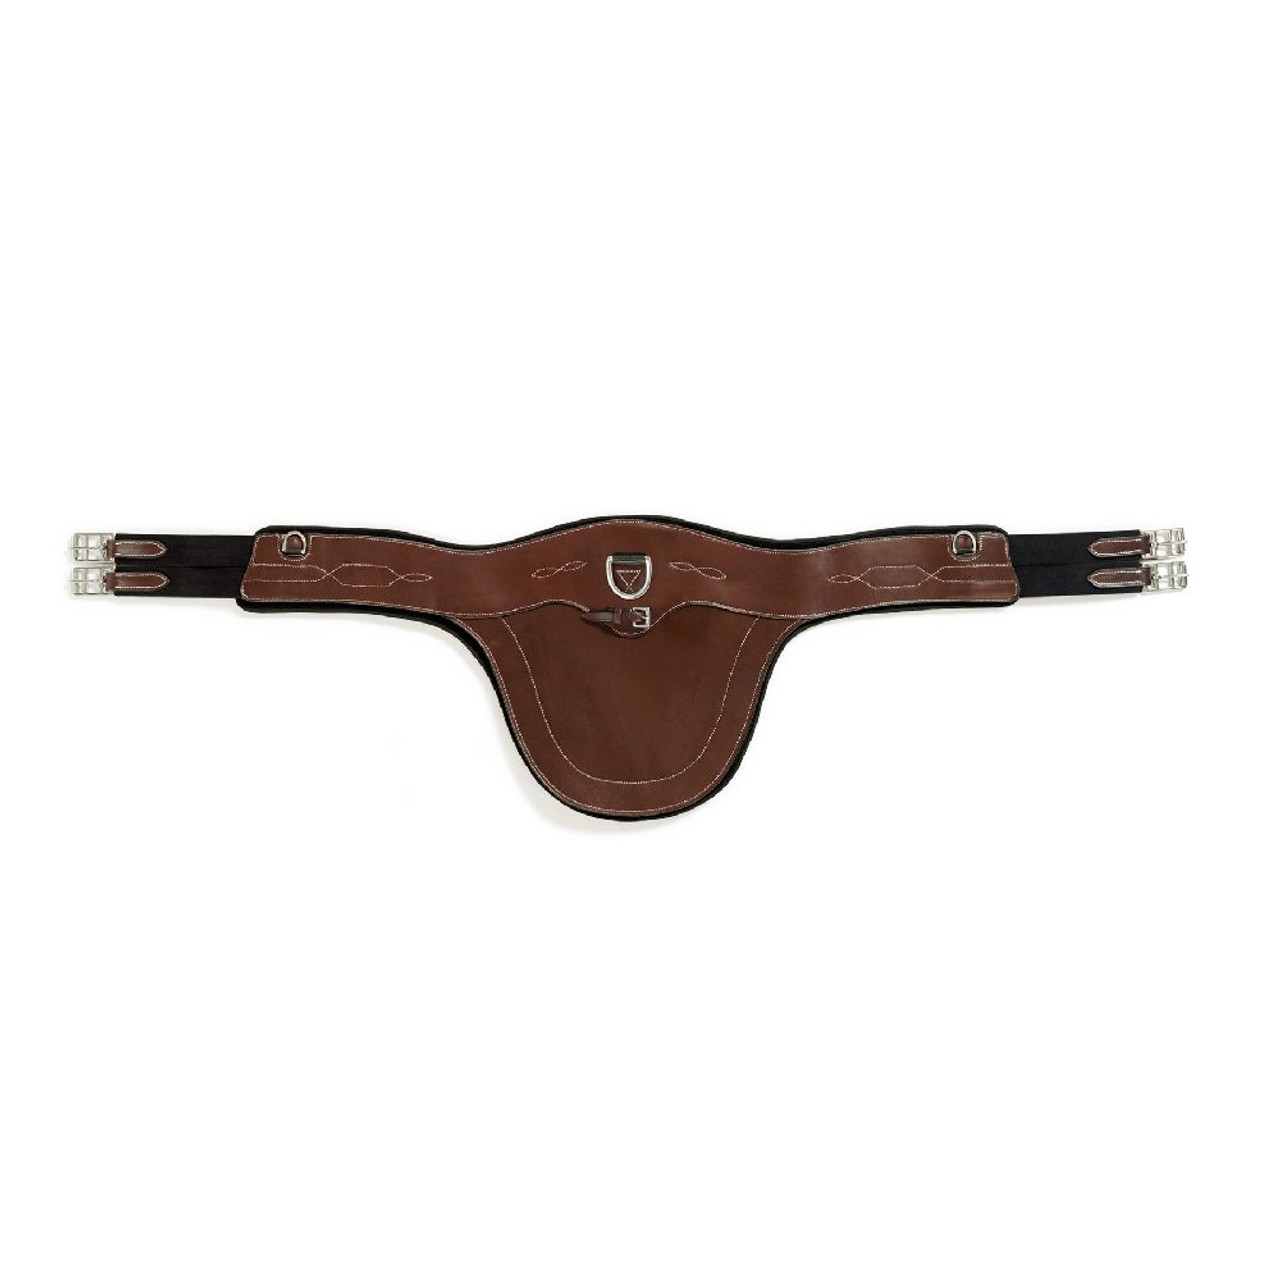 https://cdn11.bigcommerce.com/s-99vj2qx/images/stencil/1280x1280/products/8615/77812/anatomical-belly-guard-girth-equifit__51409.1712845198.jpg?c=2